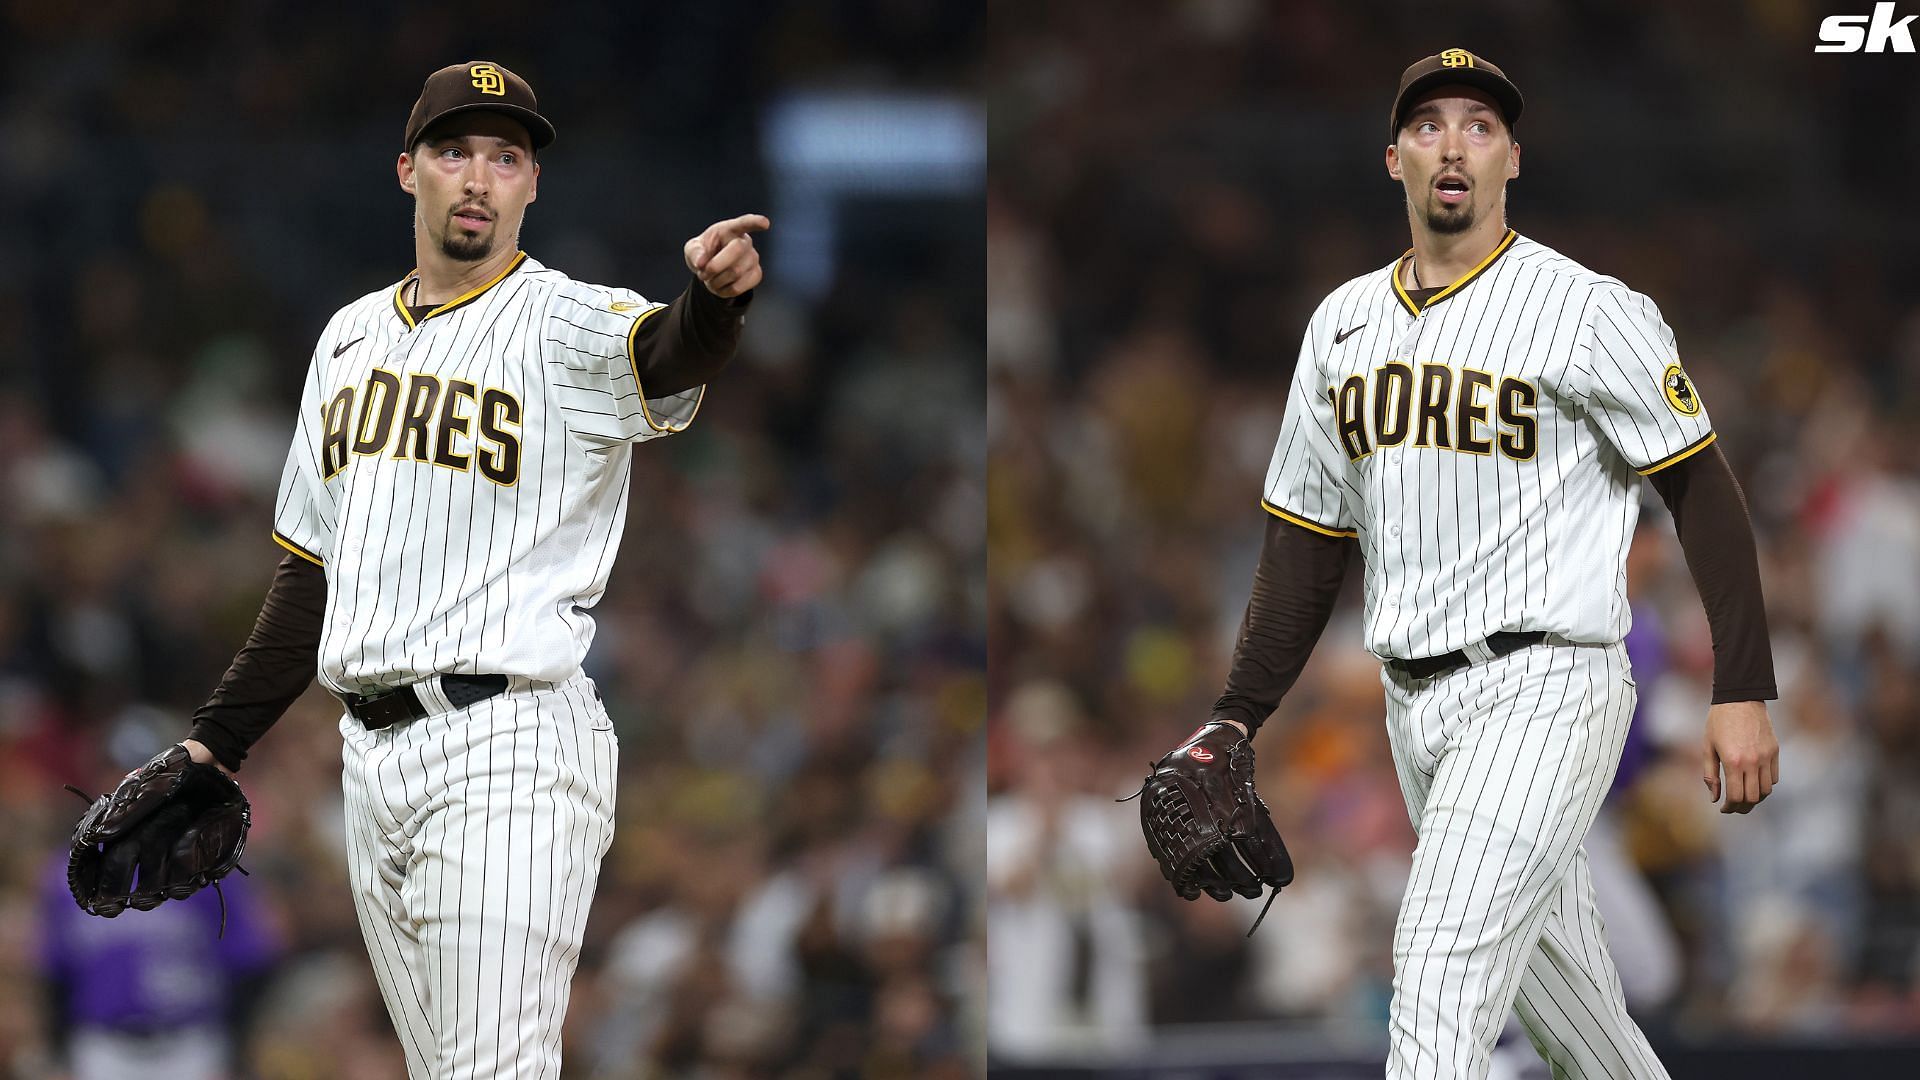 Blake Snell of the San Diego Padres pitches in the MLB